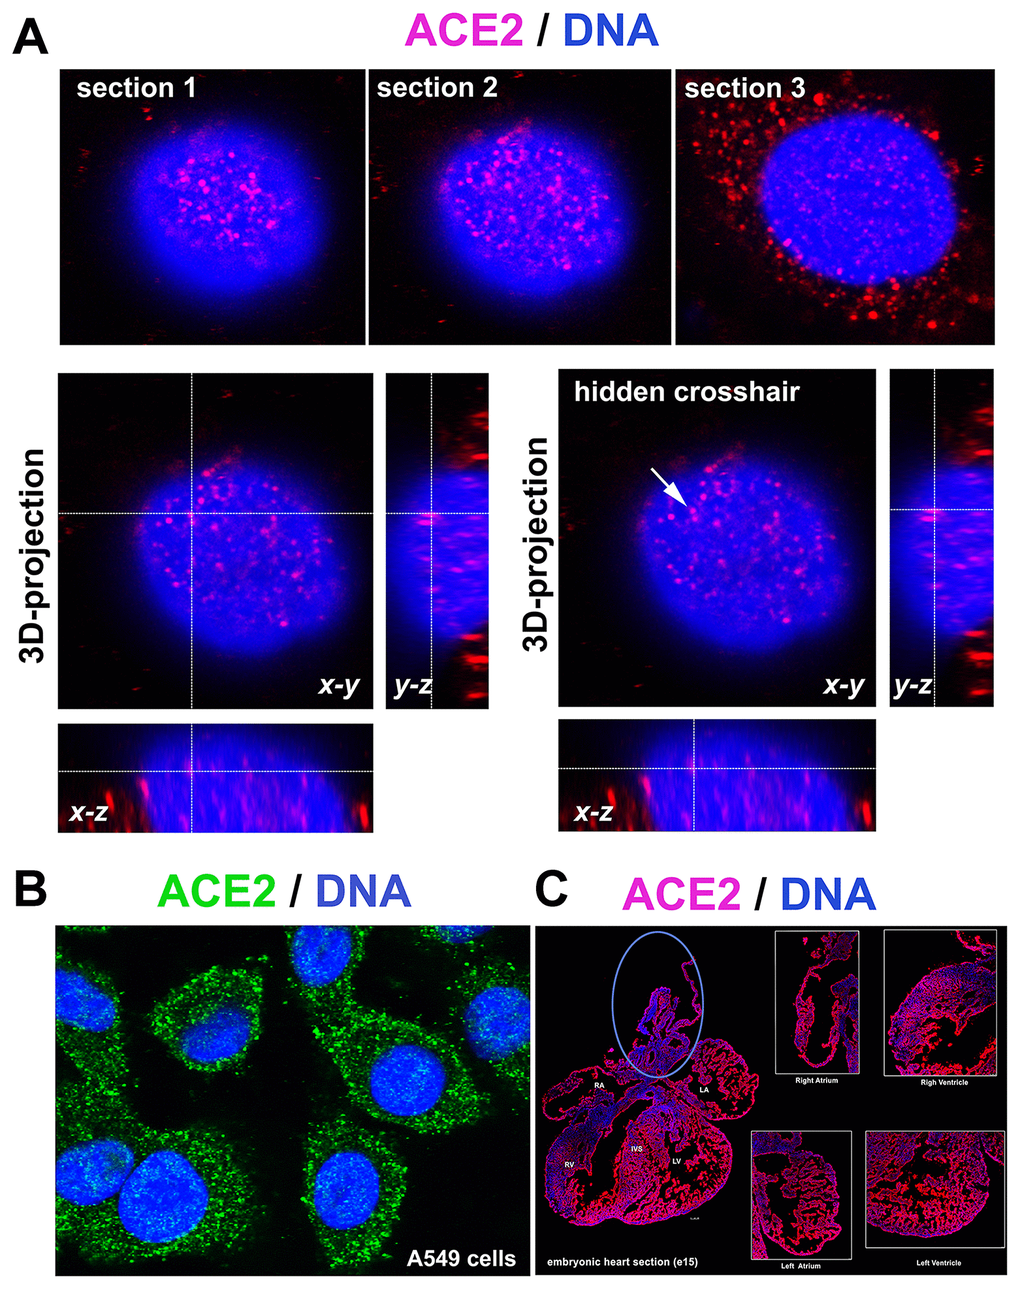 ACE2 in lung A549 cells and mouse embryonic heart sections. (A) 3D-projection of images obtained by confocal microscopy. The ACE2 protein (red fluorescence) was visualized by immunofluorescence. (B) ACE2 protein (green fluorescence) expression in A549 cells. (C) ACE2 expression in mouse heart section (red fluorescence) [see right atrium (RA), left atrium (LA), aorta (AO) and pulmonary trunk (PT), right ventriculus (RV), and left ventriculus (LV) or intraventricular septum (IVS)]. The blue ellipse shows the anatomical part associated with the aorta.